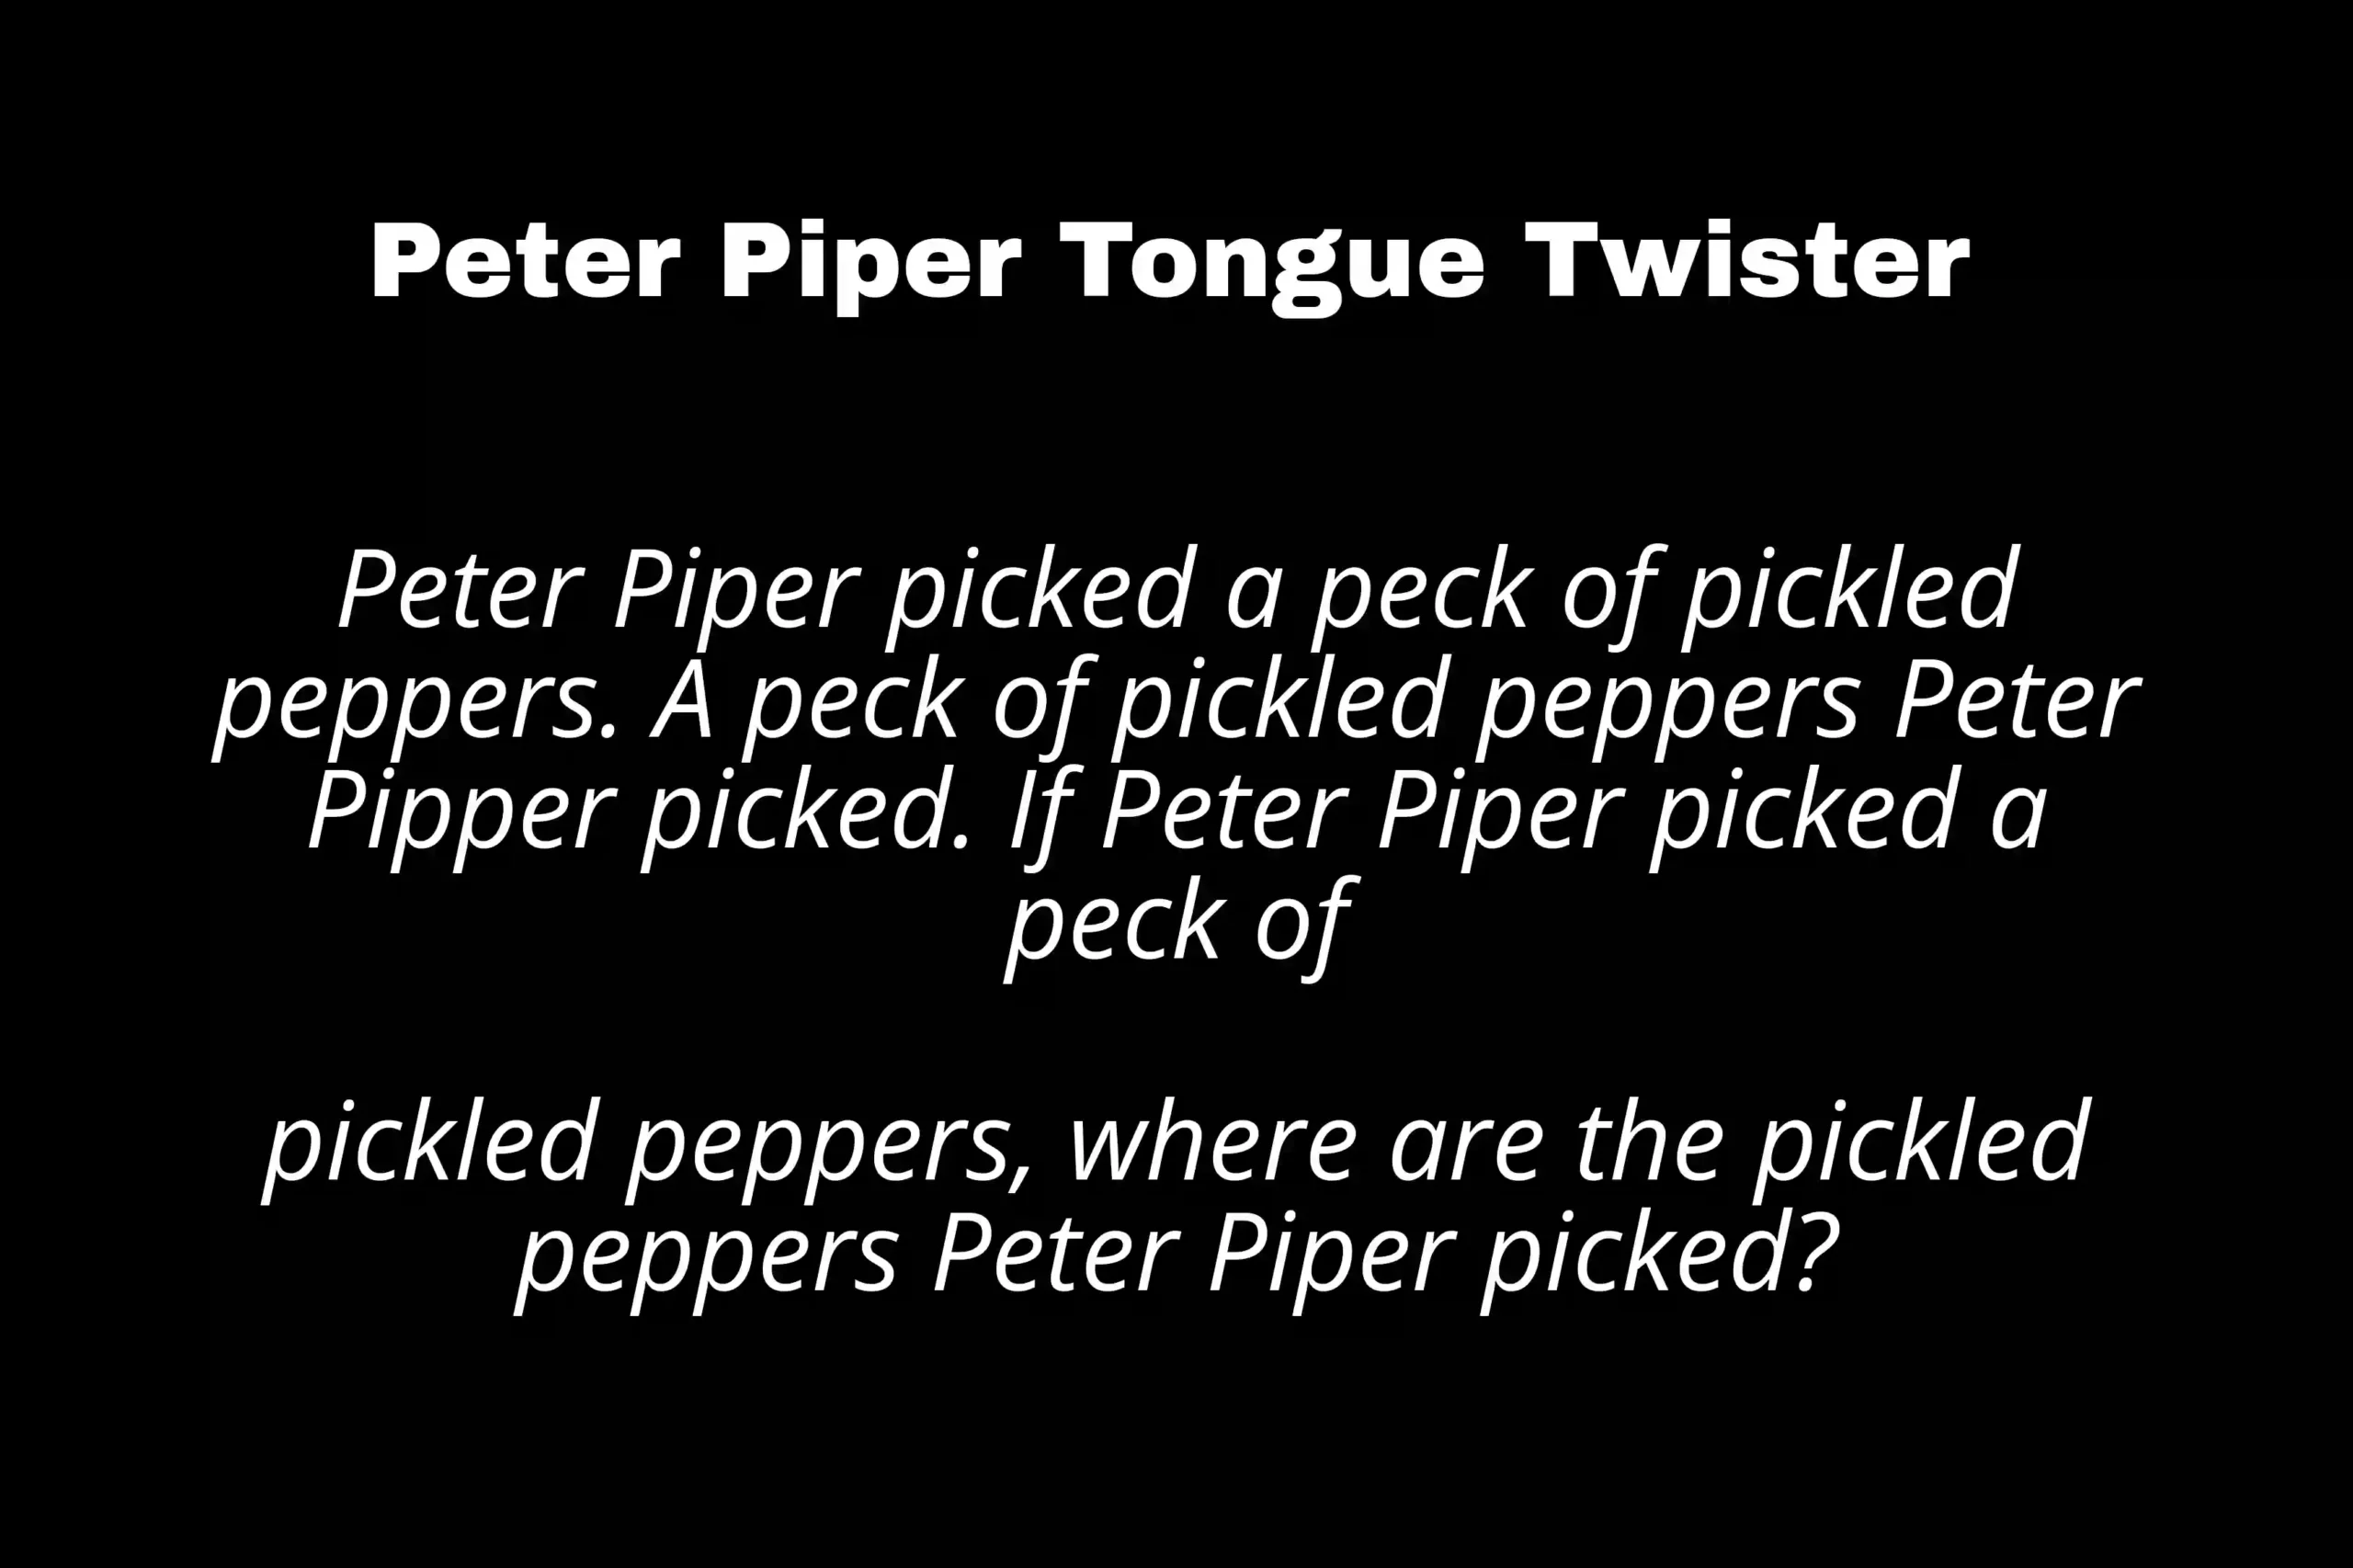 Peter Piper Tongue Twister